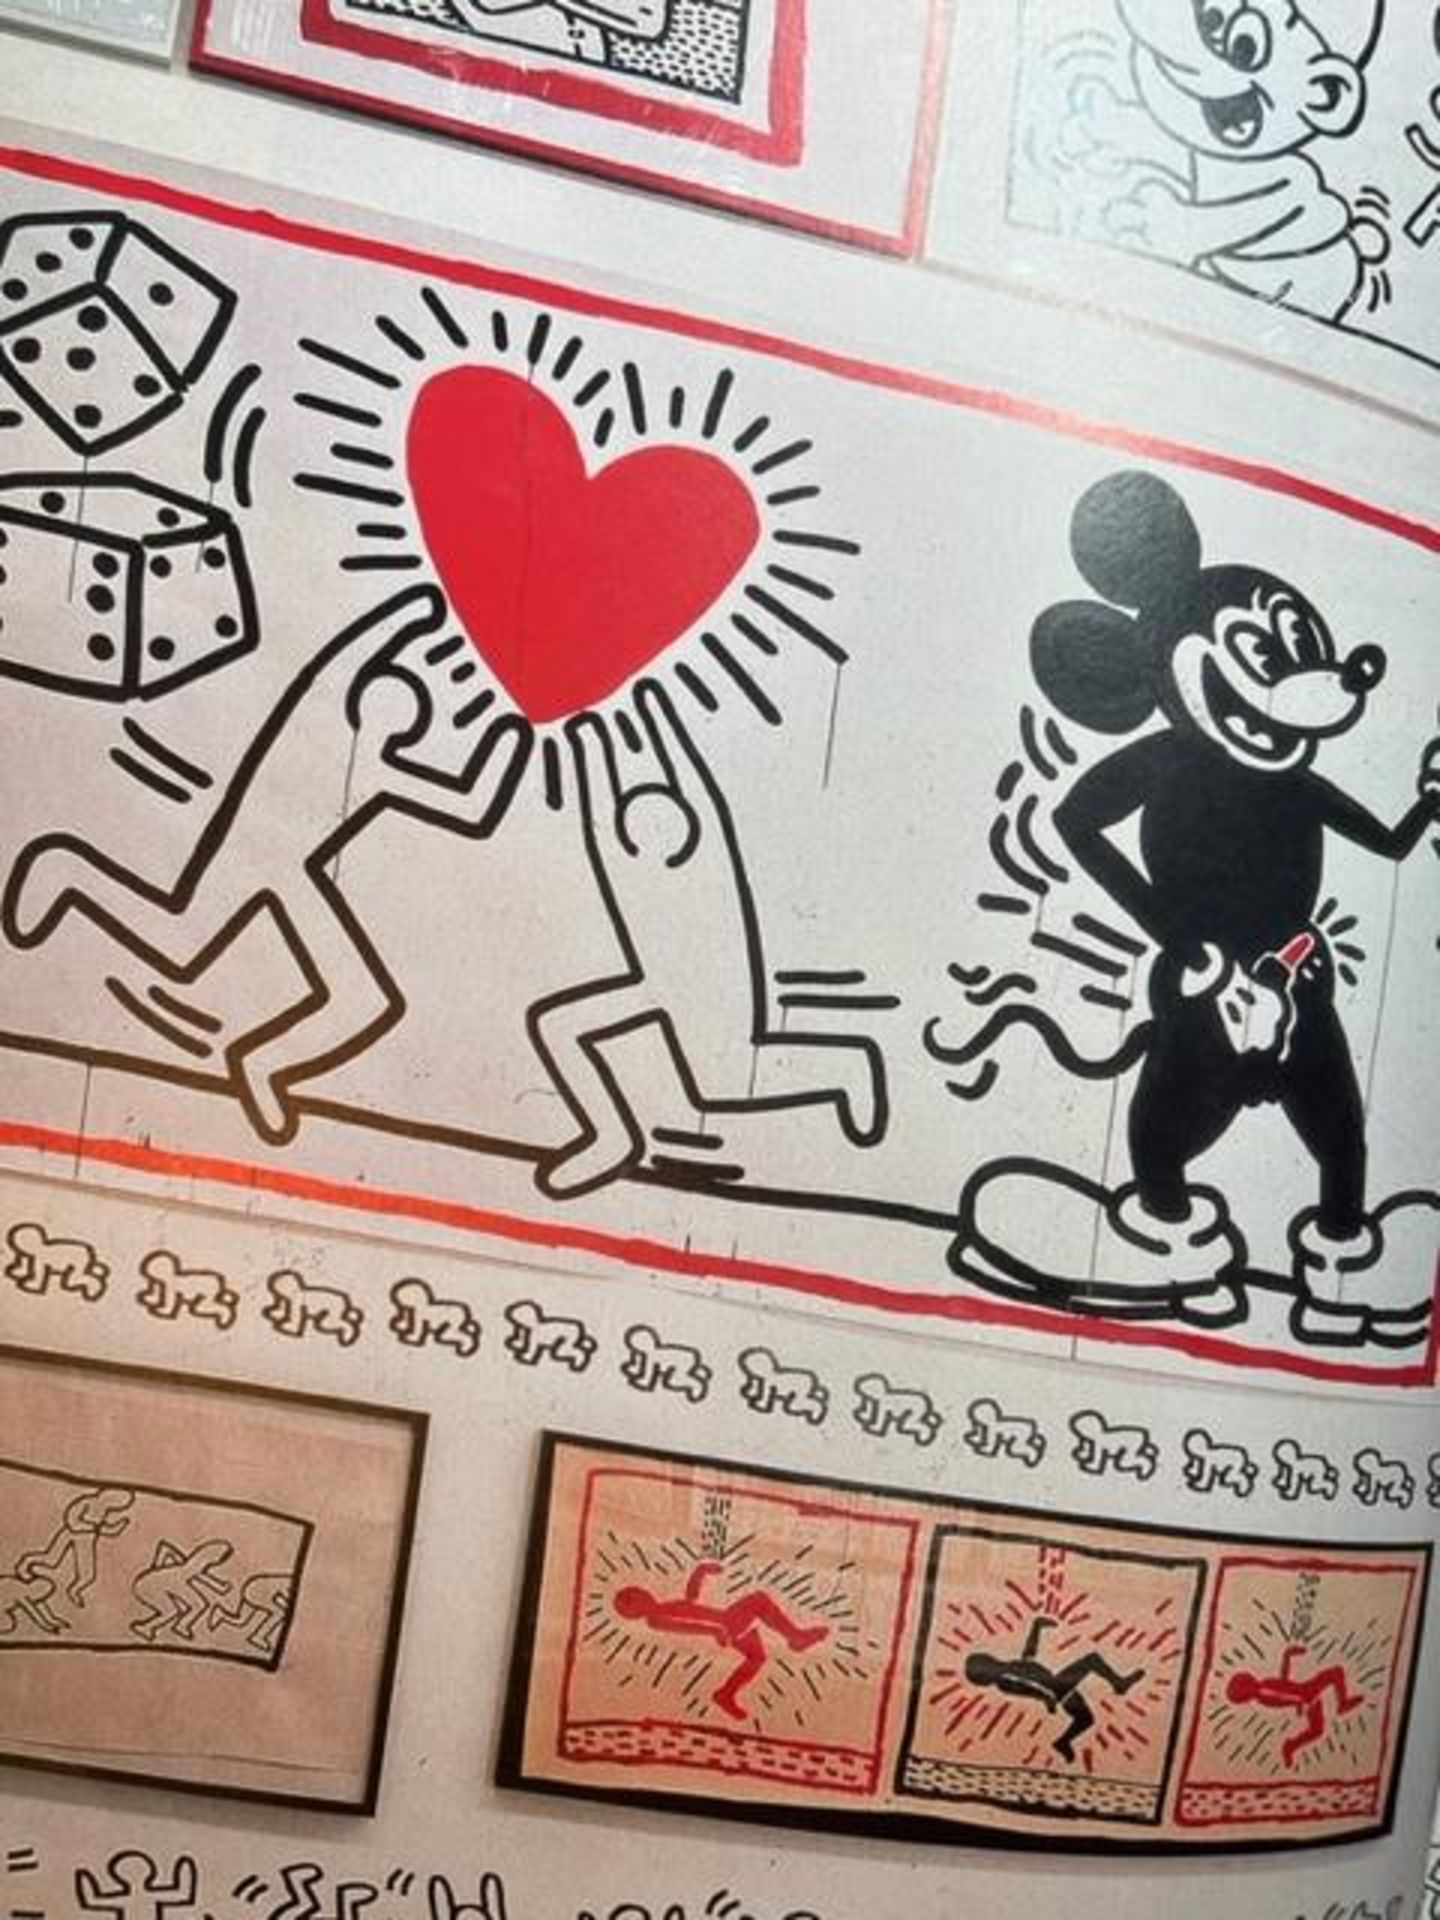 Keith Haring "Untitled" Print. - Image 6 of 6